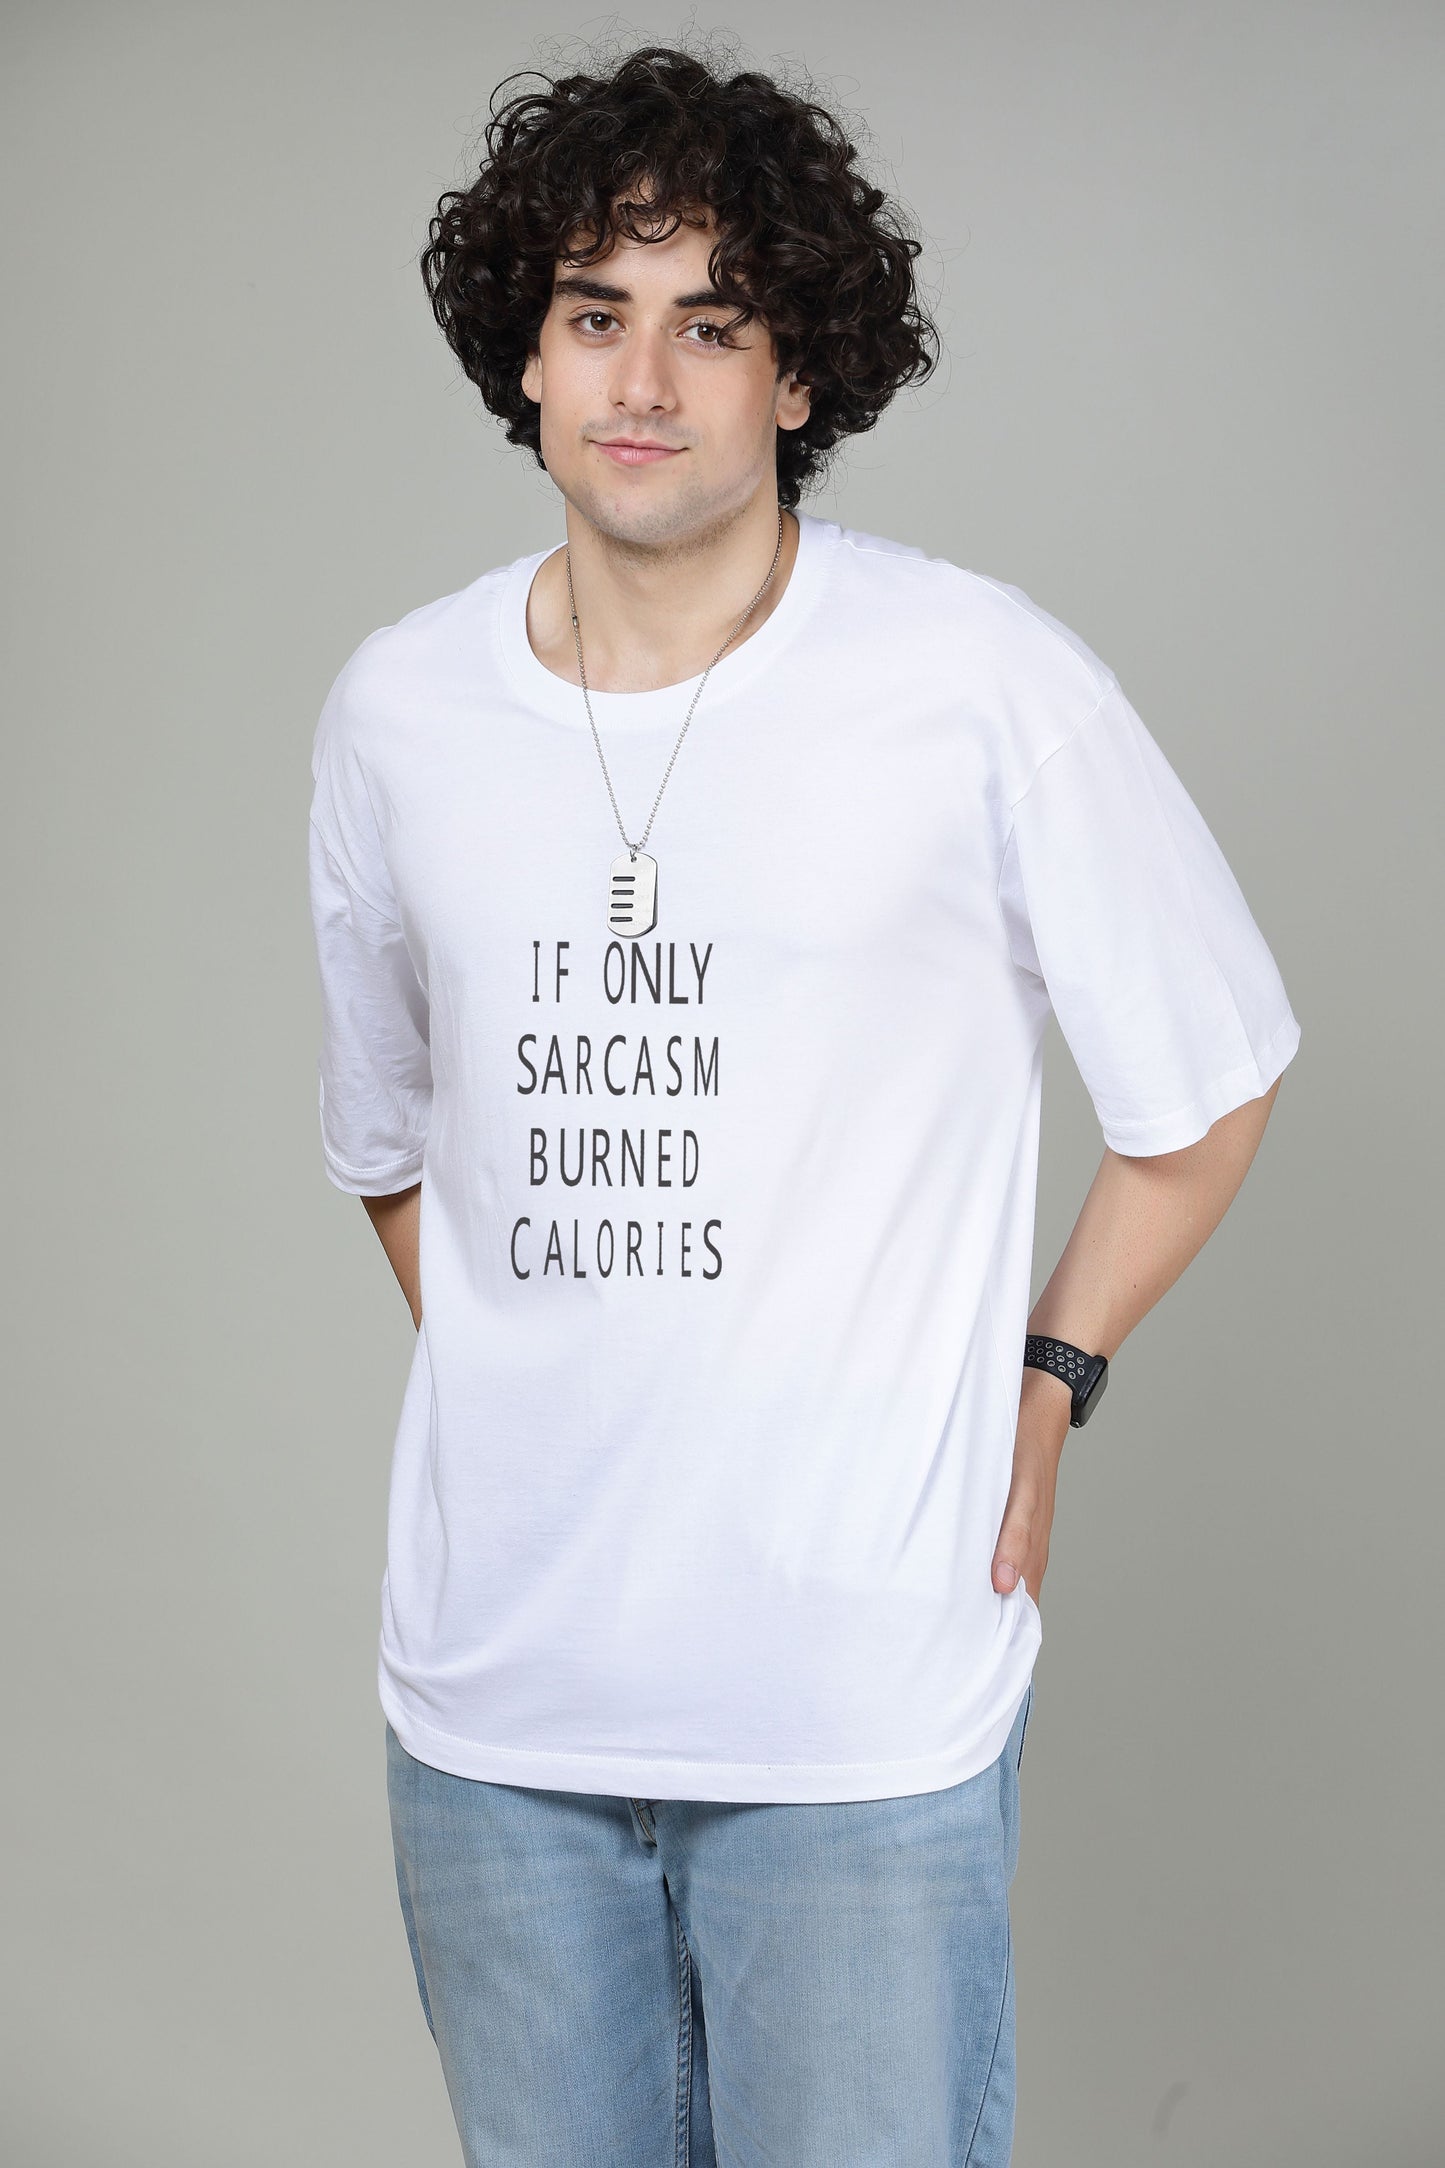 If only Sarcasm burned calories - Printed Oversized Tees